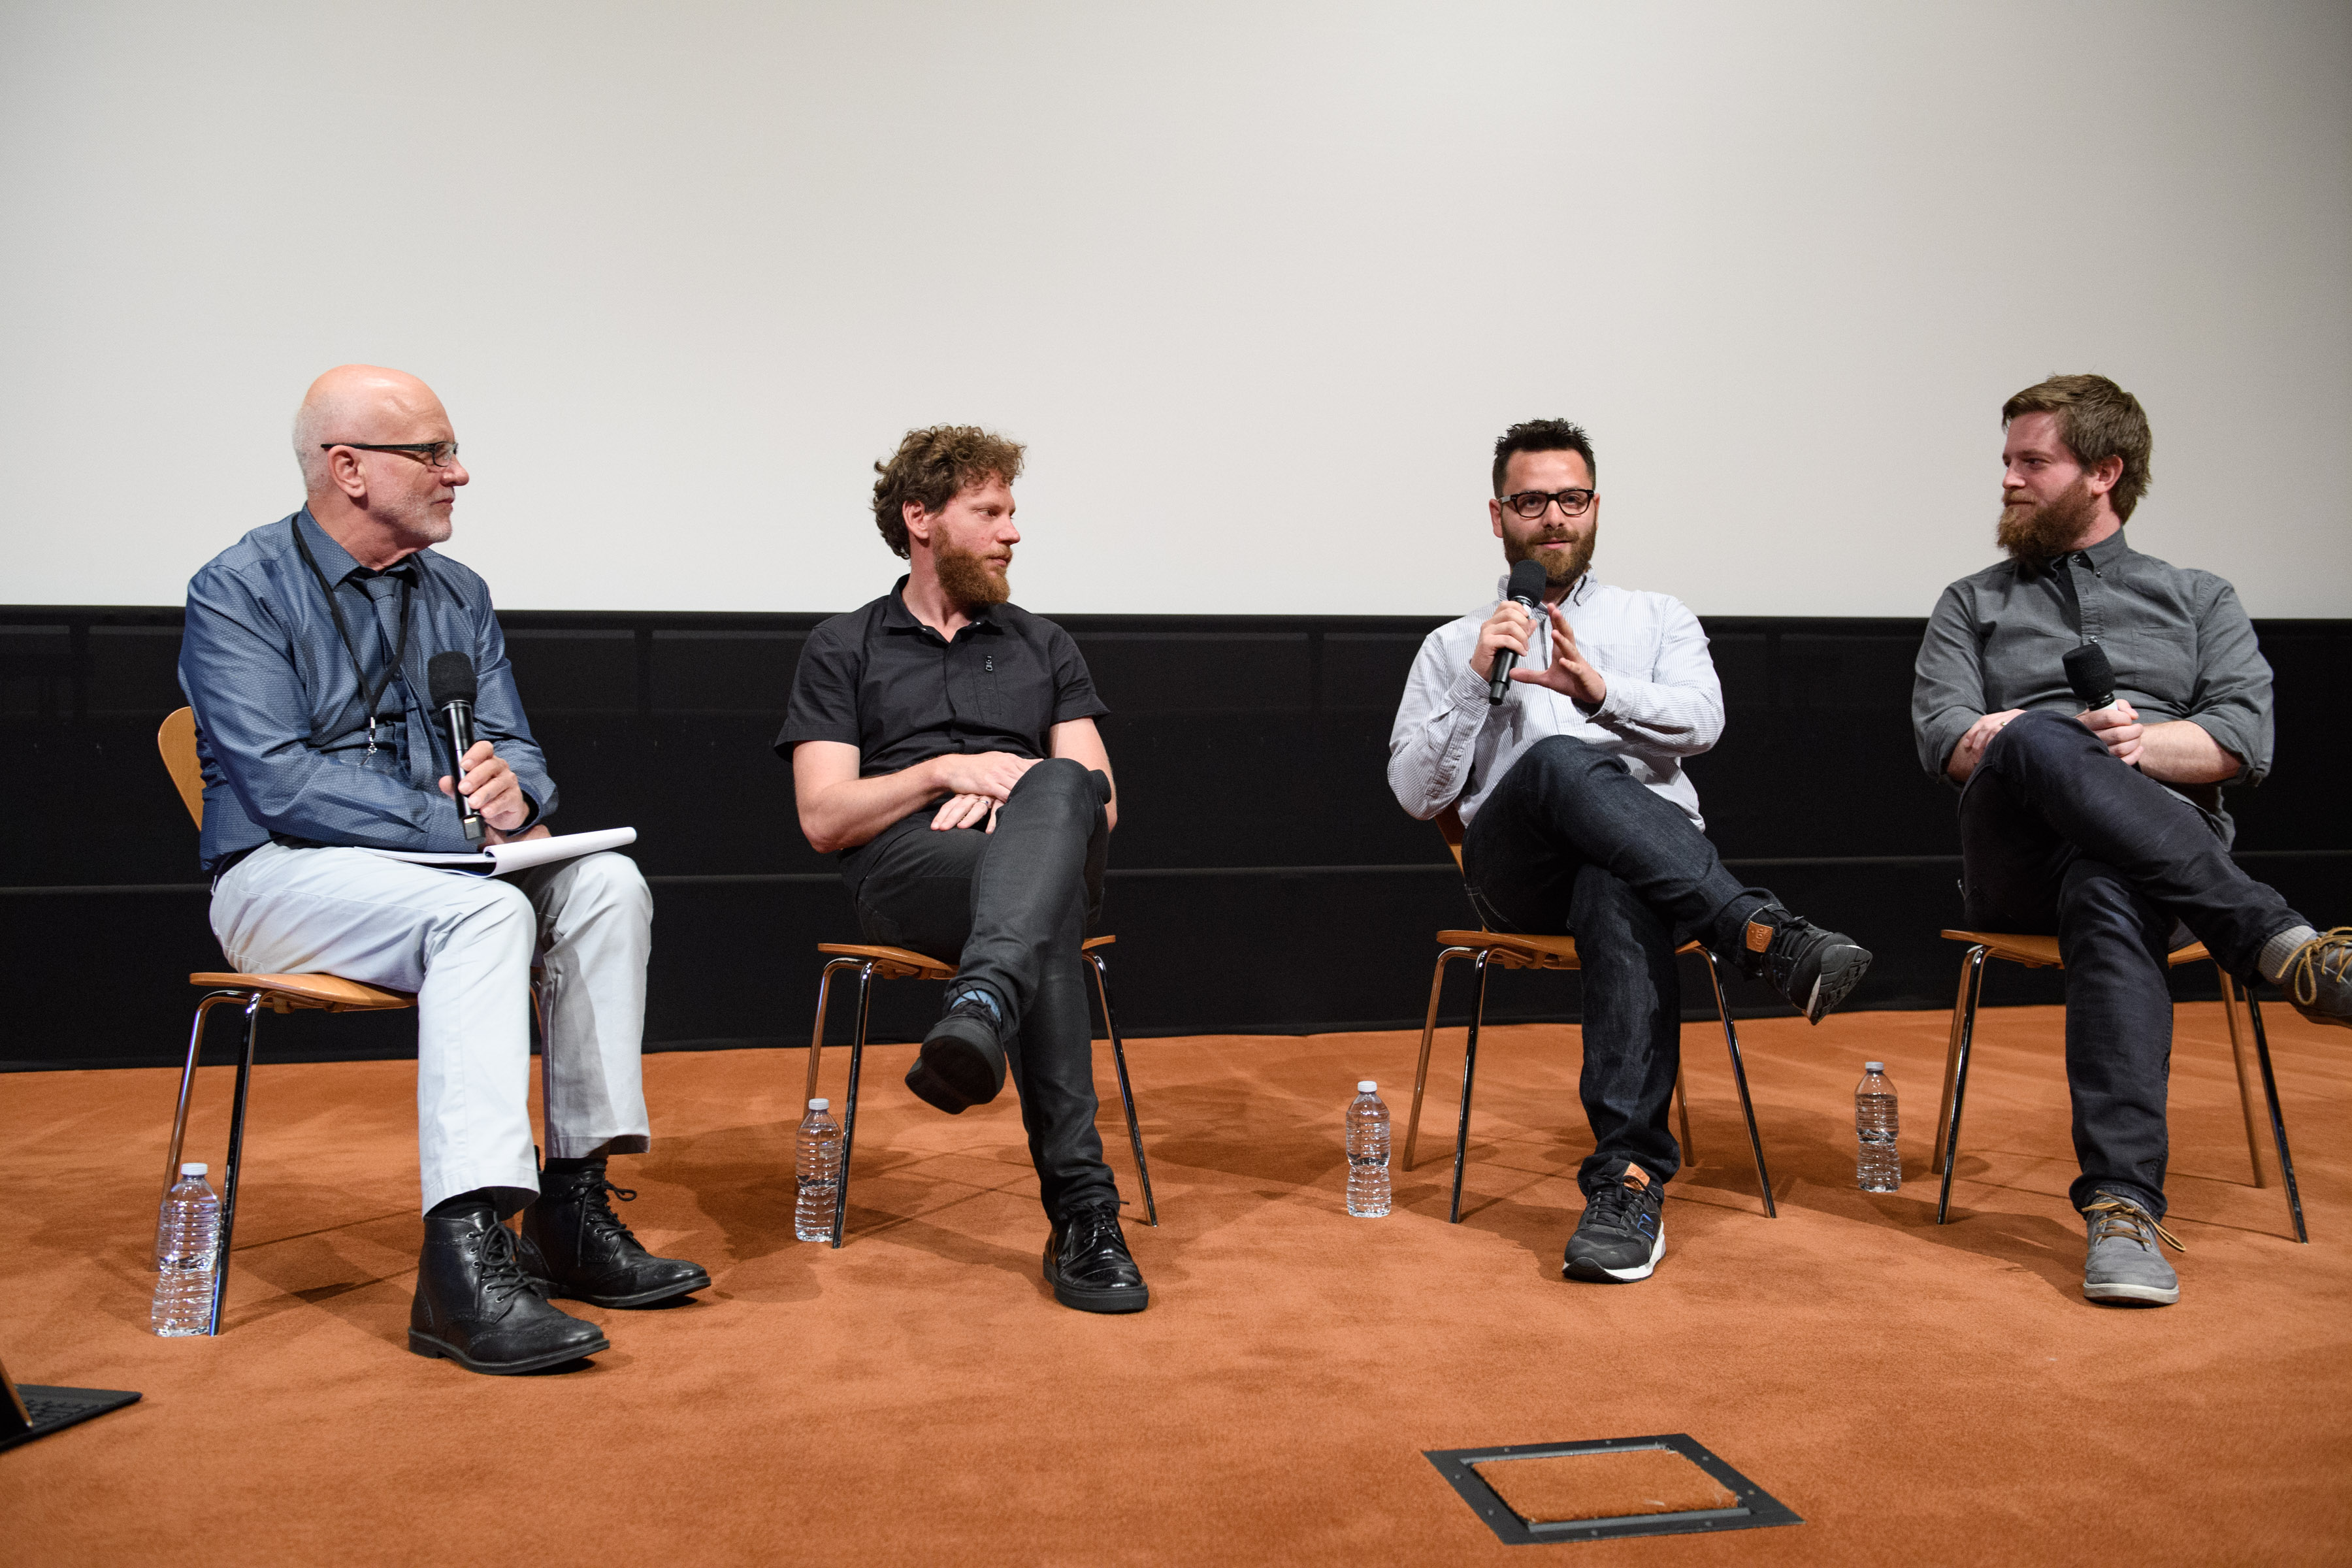 The ACES discussion was moderated by ICG business manager Michael Chambliss, while the panelists included DIT/workflow supervisor Francesco Giardiello, Mytherapy chief colorist Dado Valentic and Legendary Entertainment director of postproduction technology Brandon Bussing. Photo courtesy of the Academy of Motion Picture Arts and Sciences